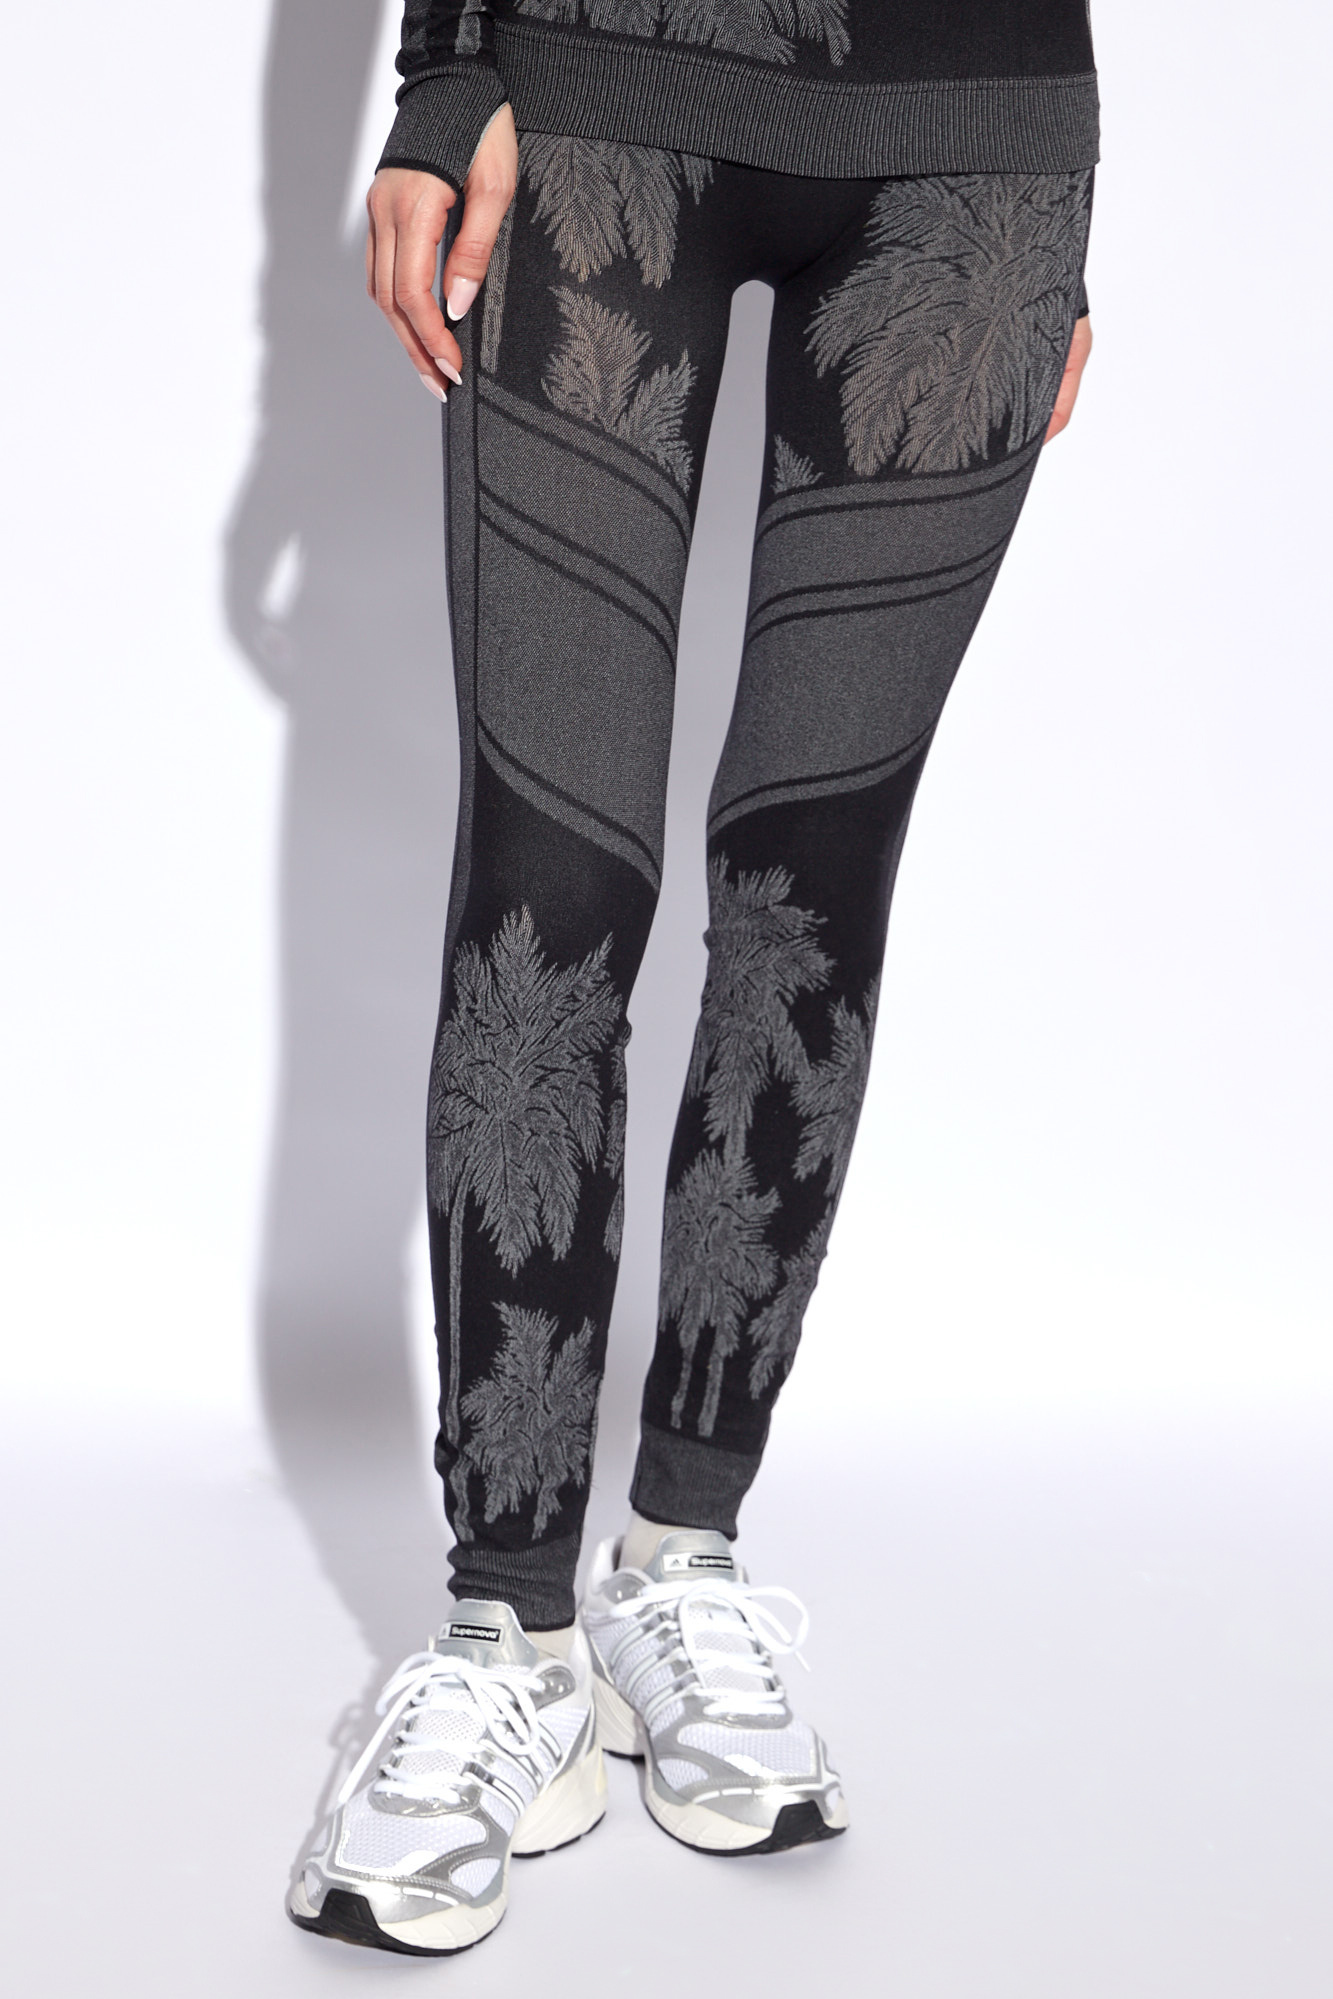 Palm Angels Take your casual style to new heights in the ® Arya Cotton Shirring Pants with Neon Drawstring